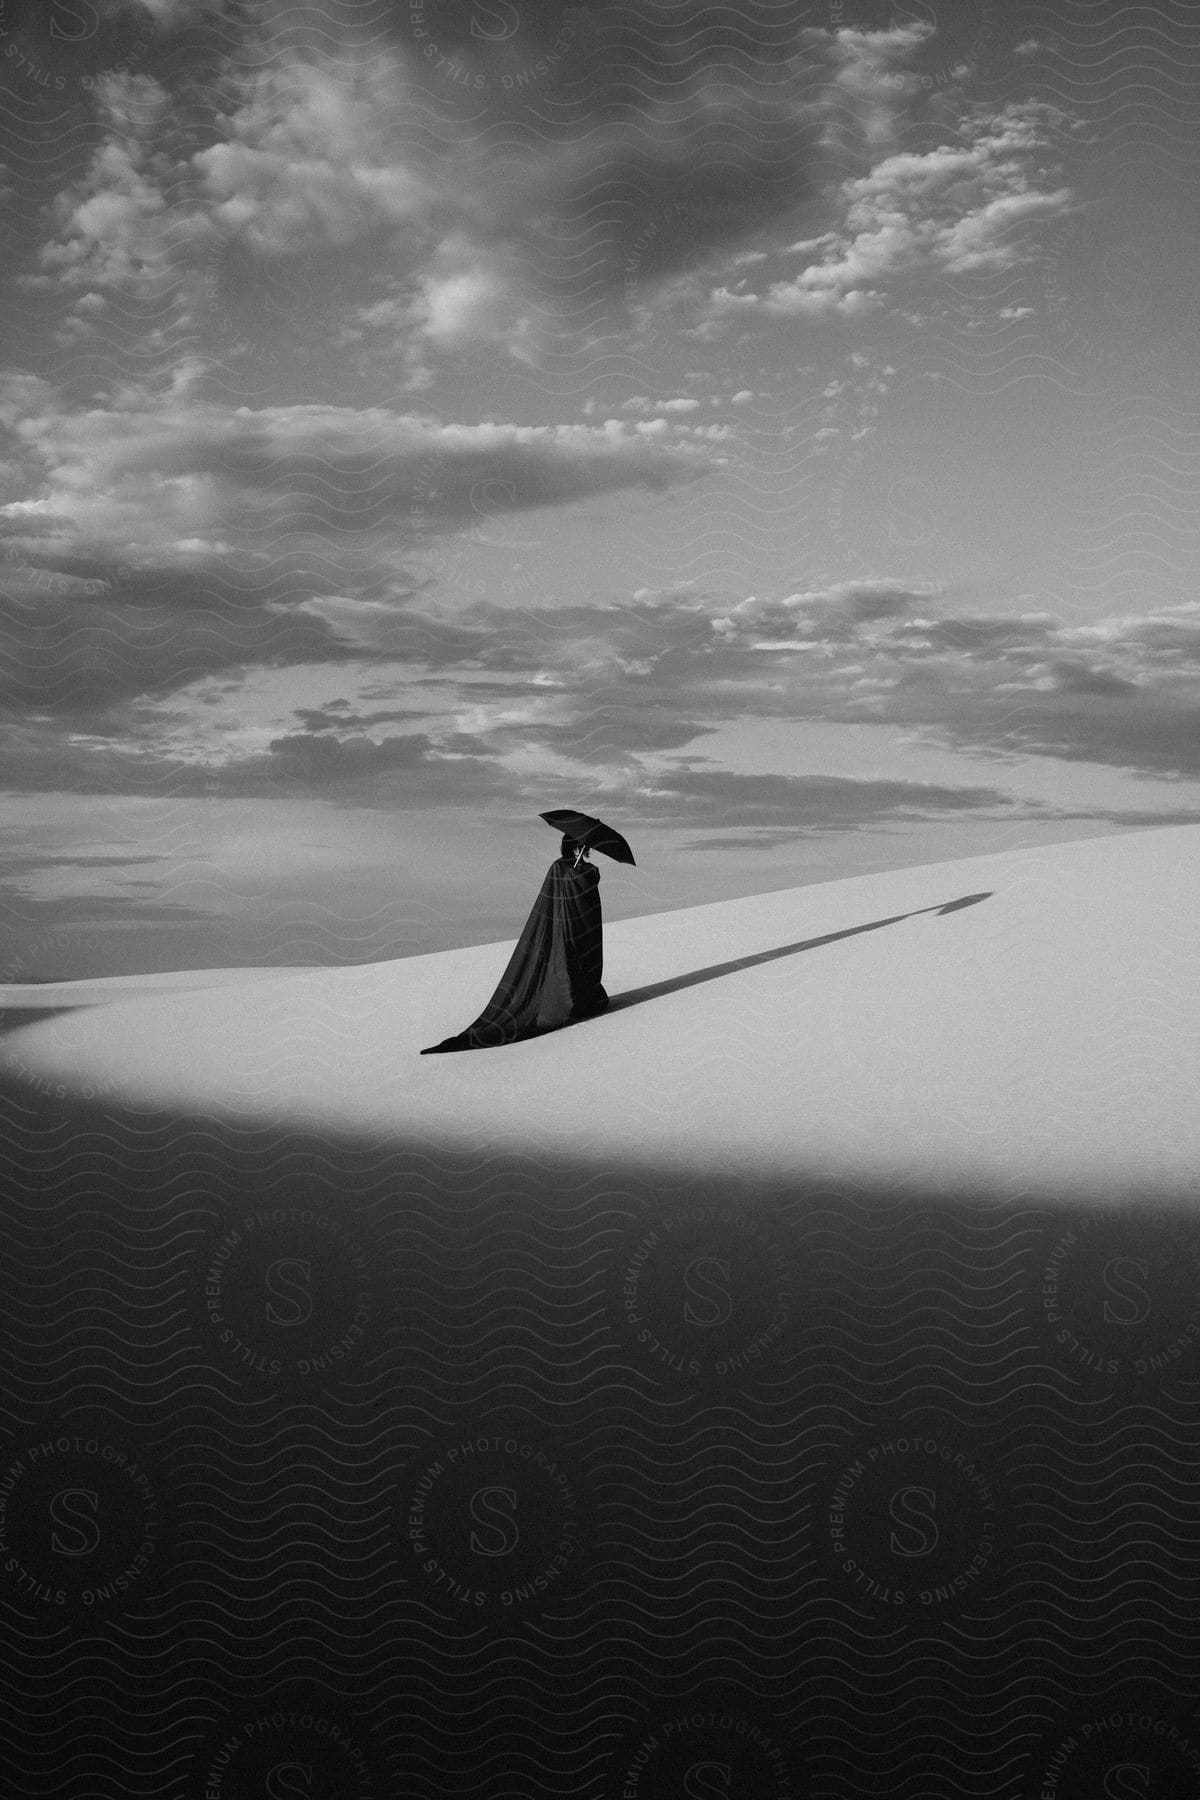 Woman in a black cloak holding an umbrella casting a shadow on the sand in the outdoors